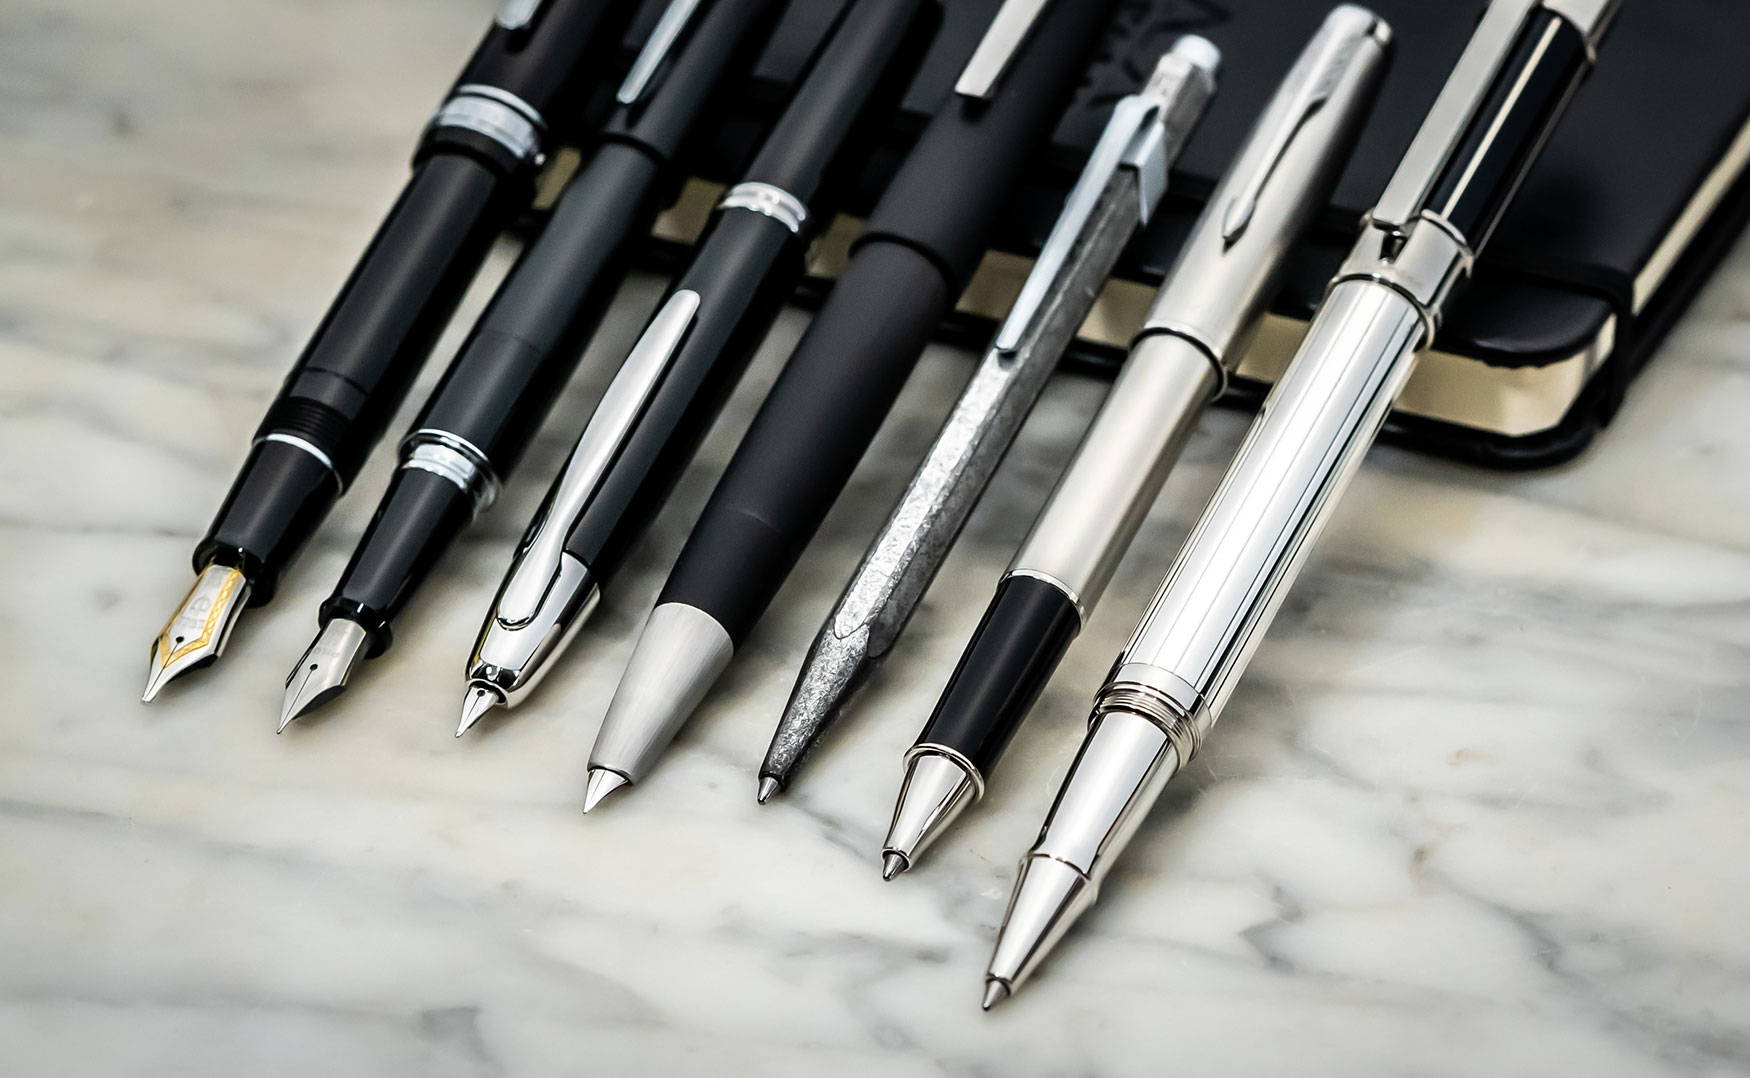 A brief guide to fineliner pens - The Pen Company Blog